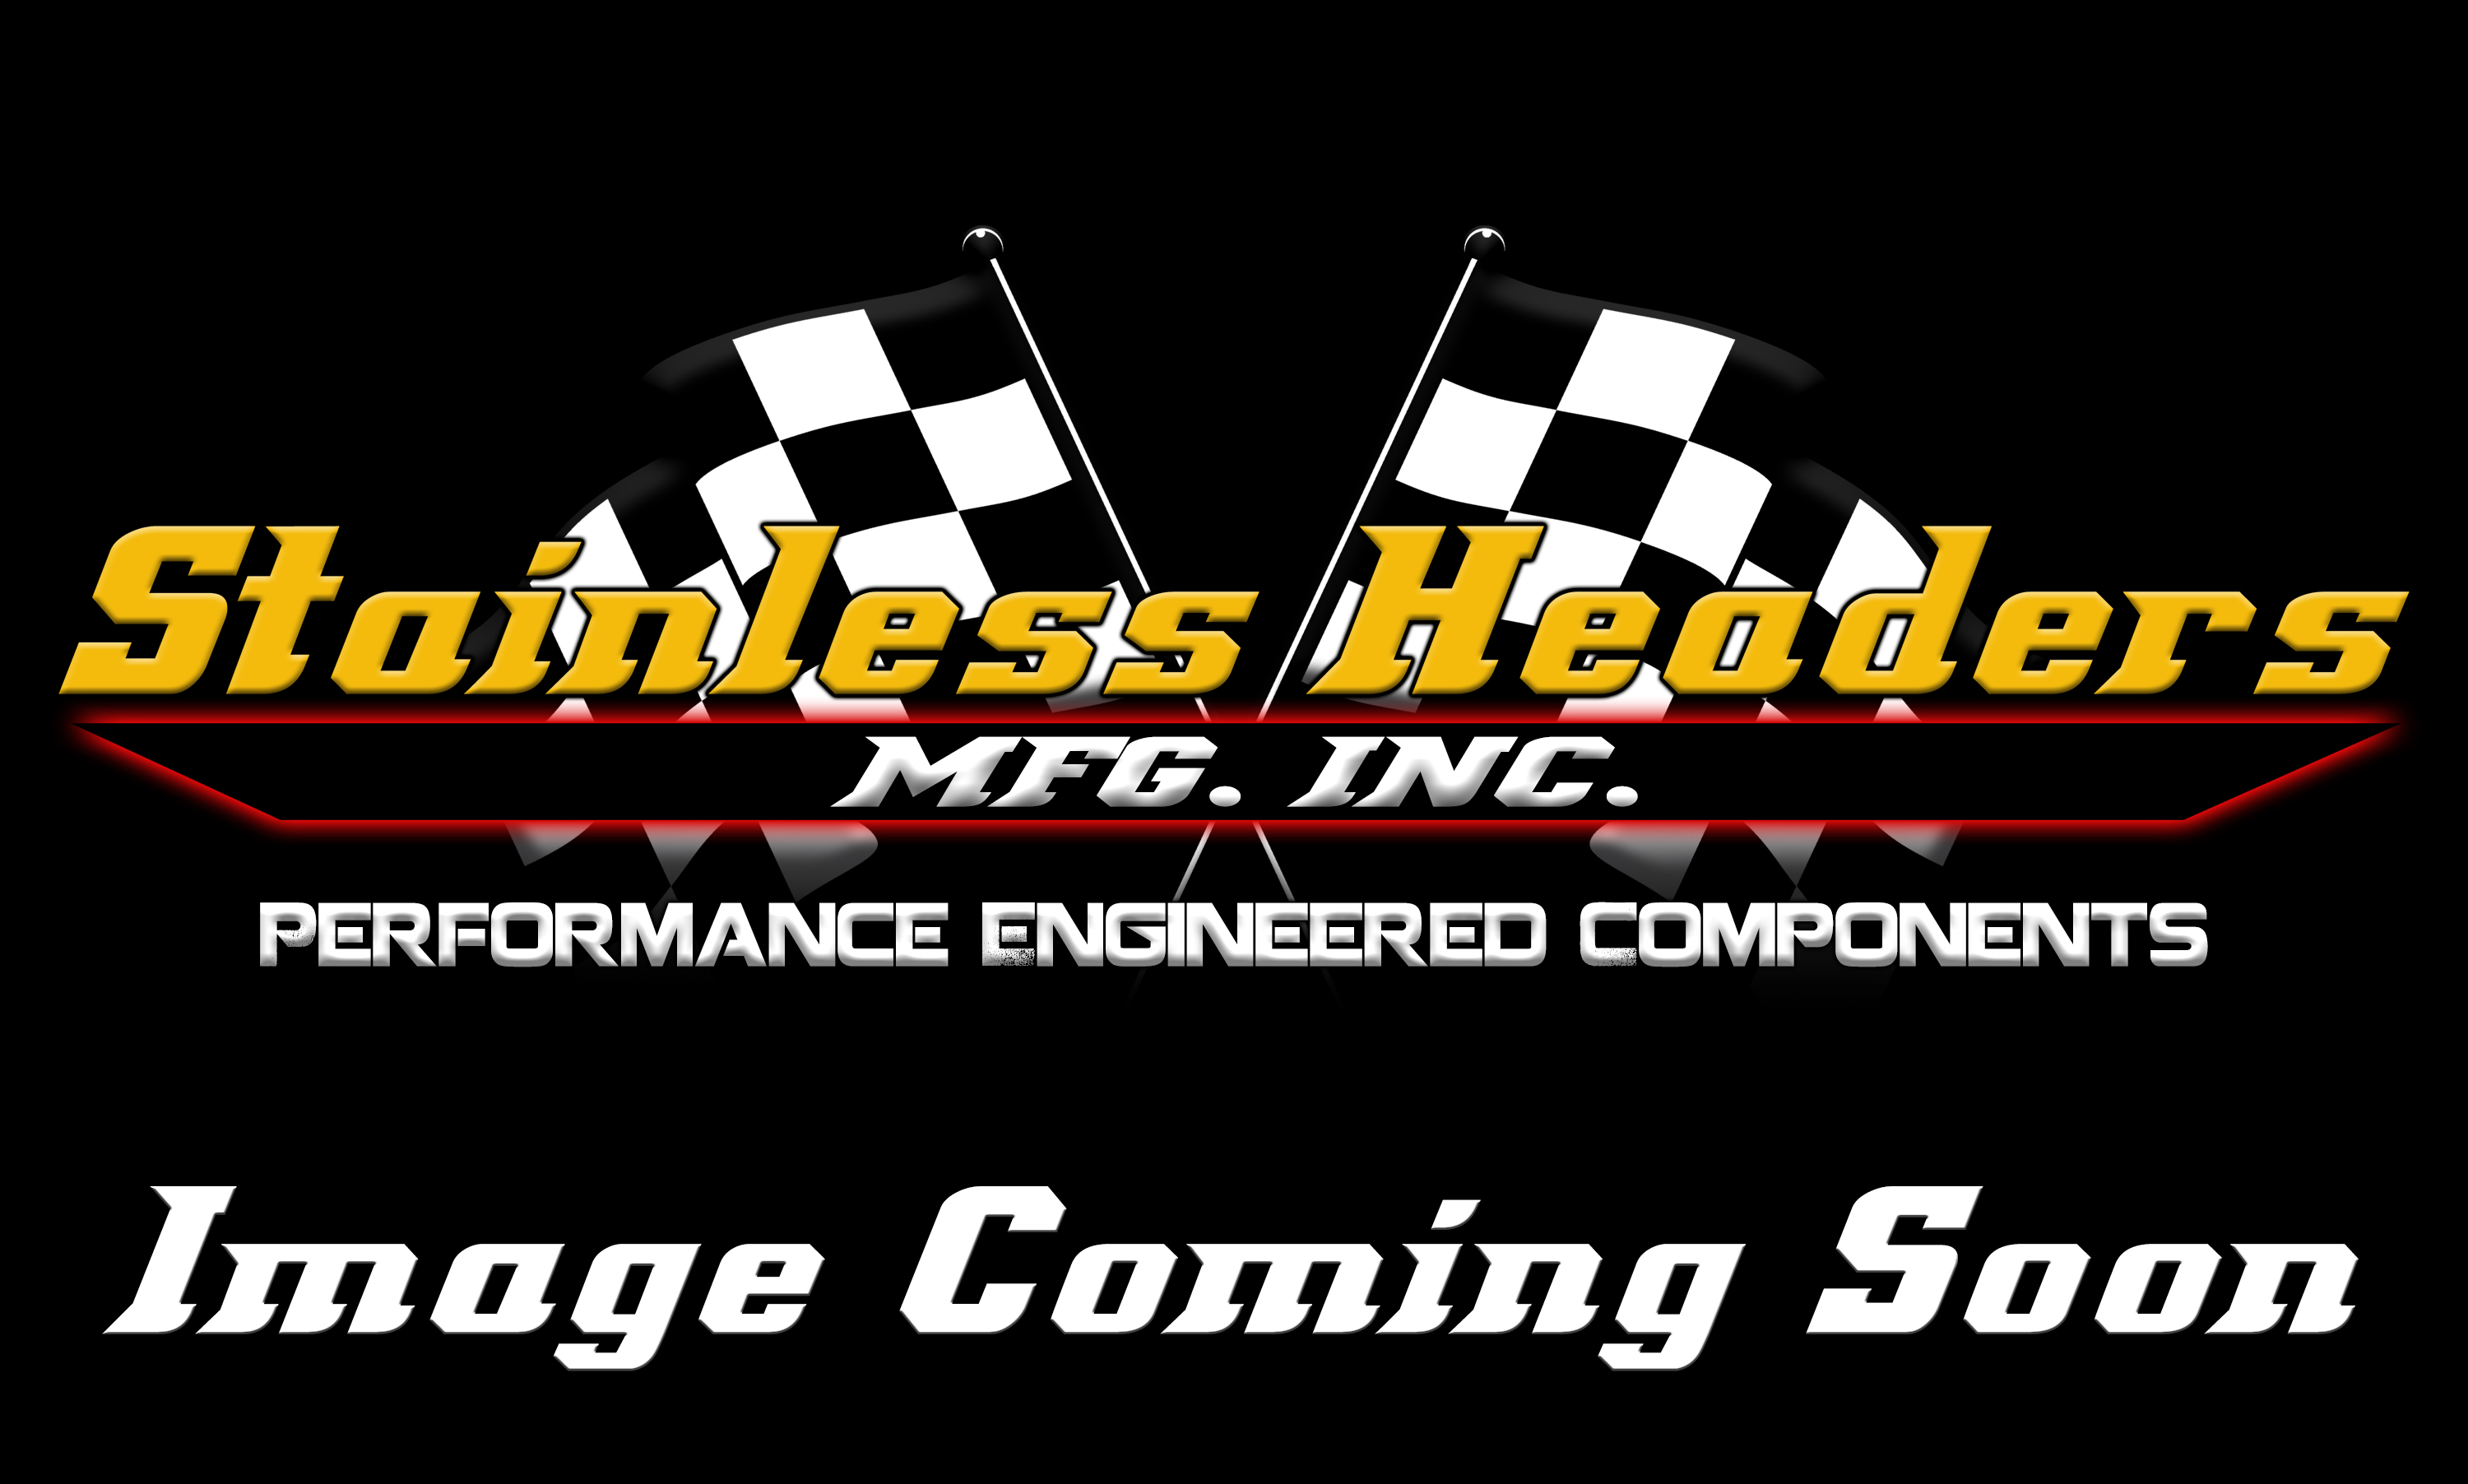 Stainless Headers - 1 5/8" Primary 6 into 1 Performance Merge Collector-16ga 321ss - Image 2